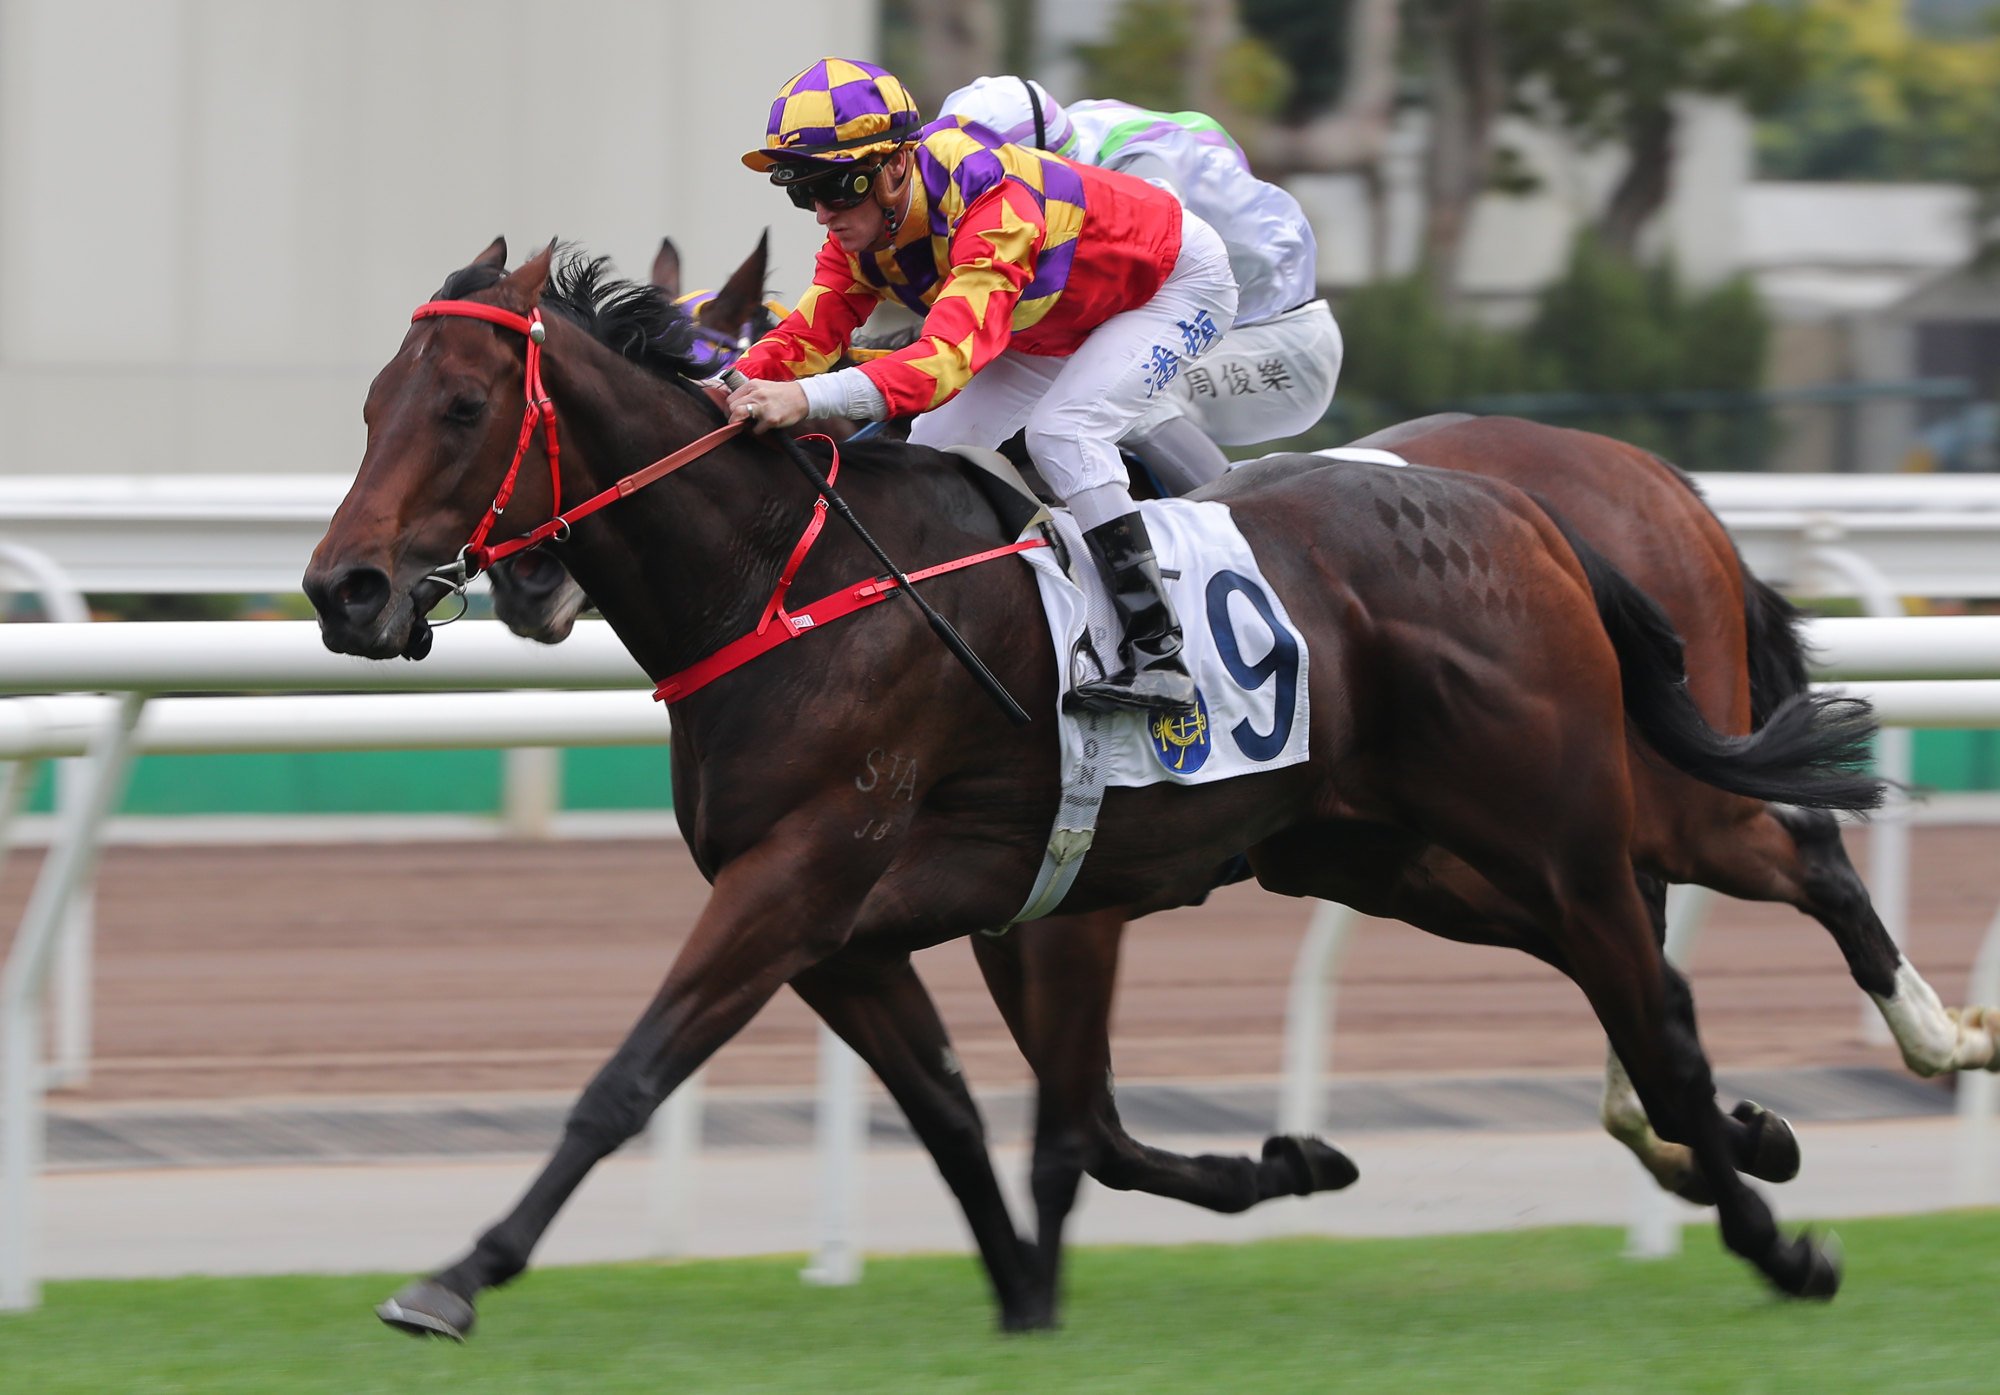 Zac Purton guides Gorgeous Win to victory at Sha Tin.